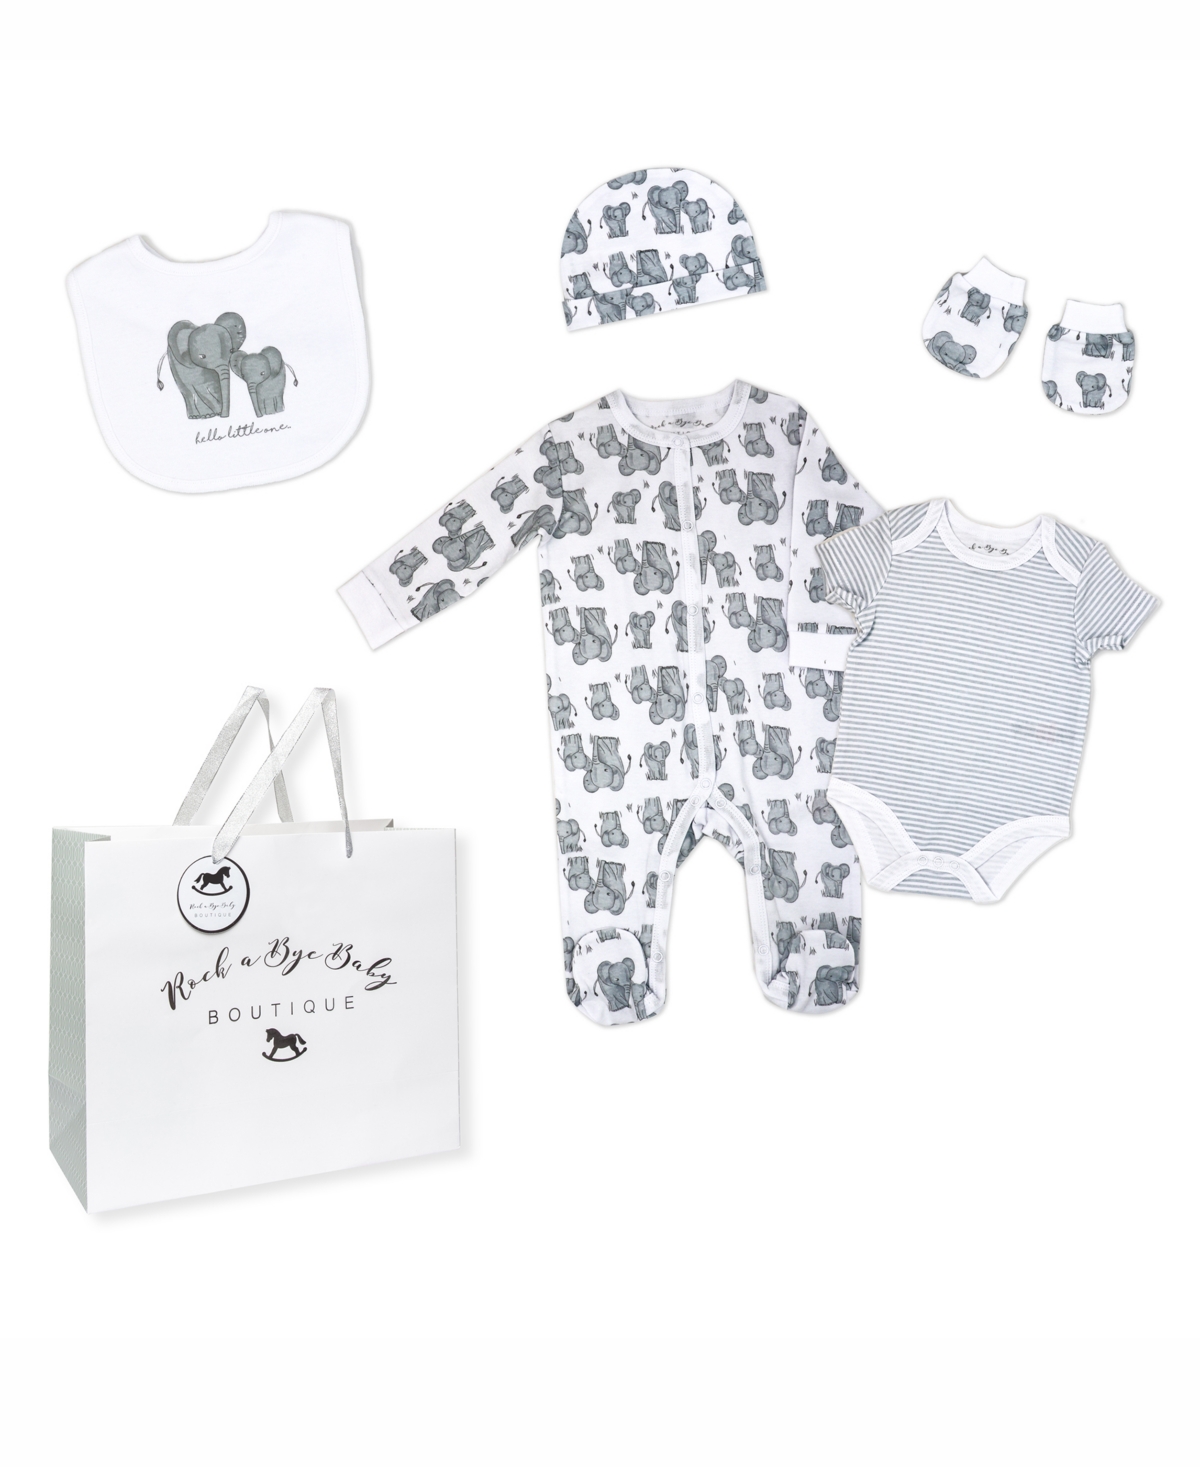 Rock-a-bye Baby Boutique Baby Boys Or Baby Girls Layette Gift Bag Set In Elephant